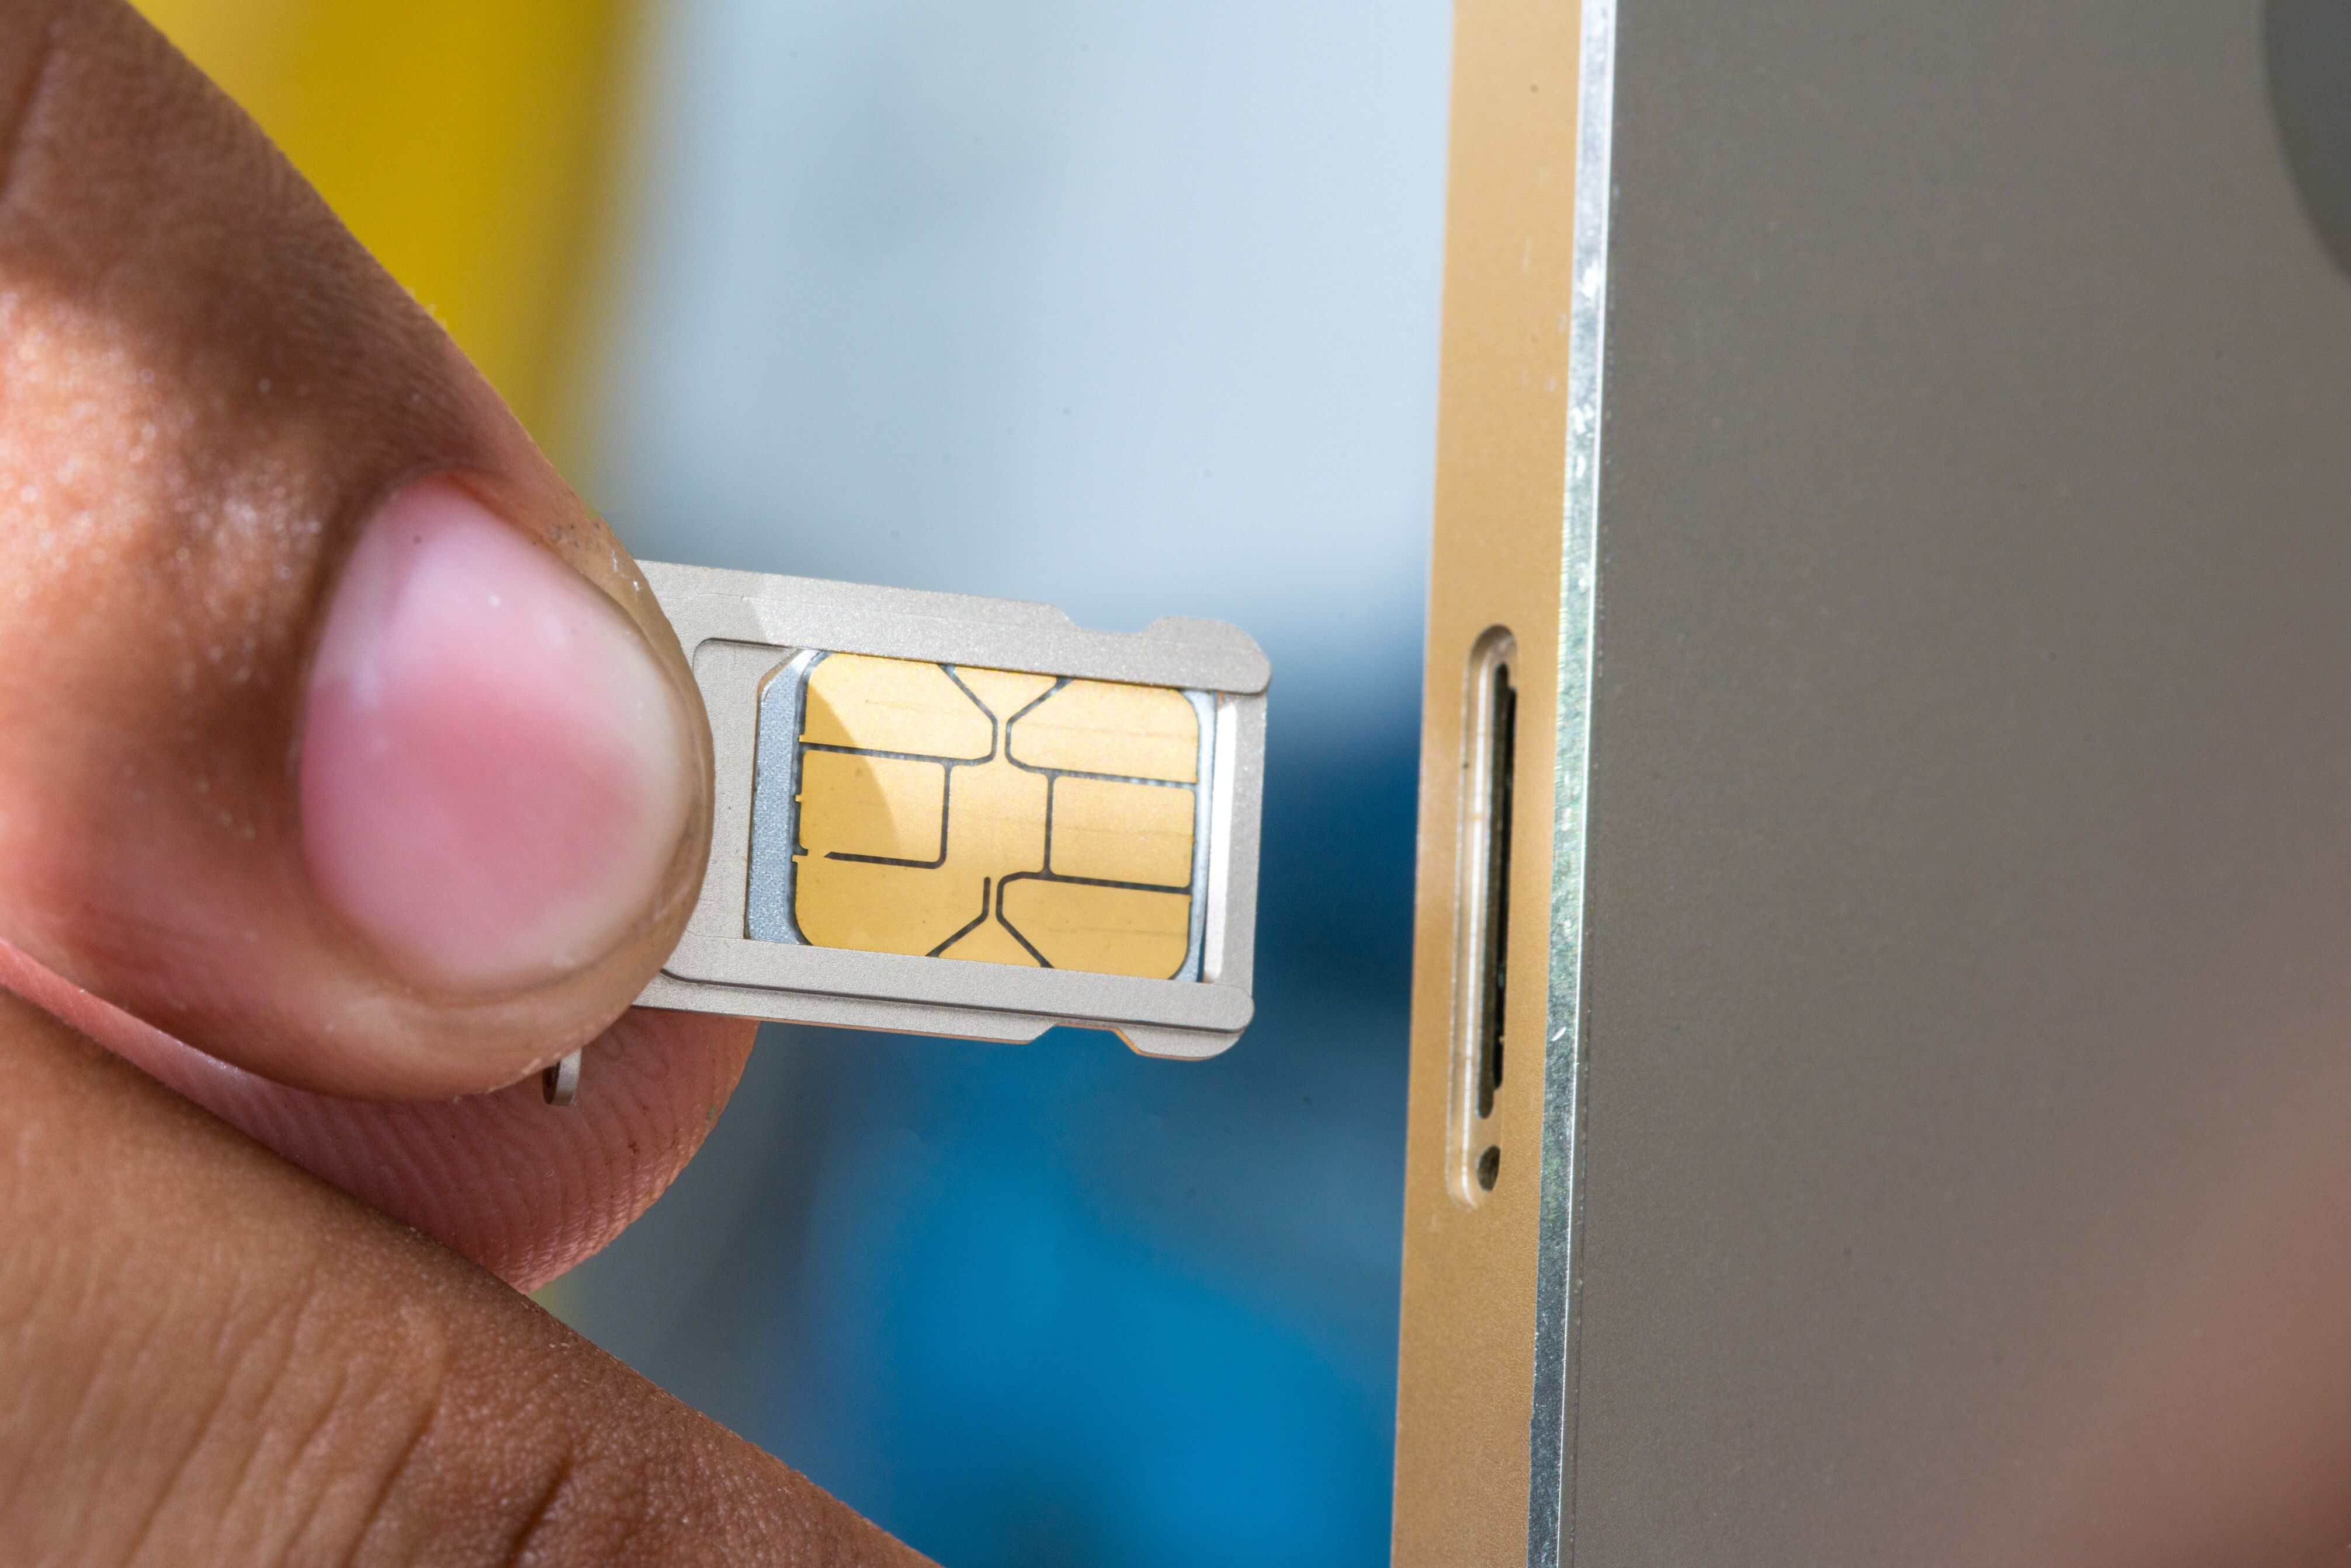 Before Changing SIM Card: Important Precautions